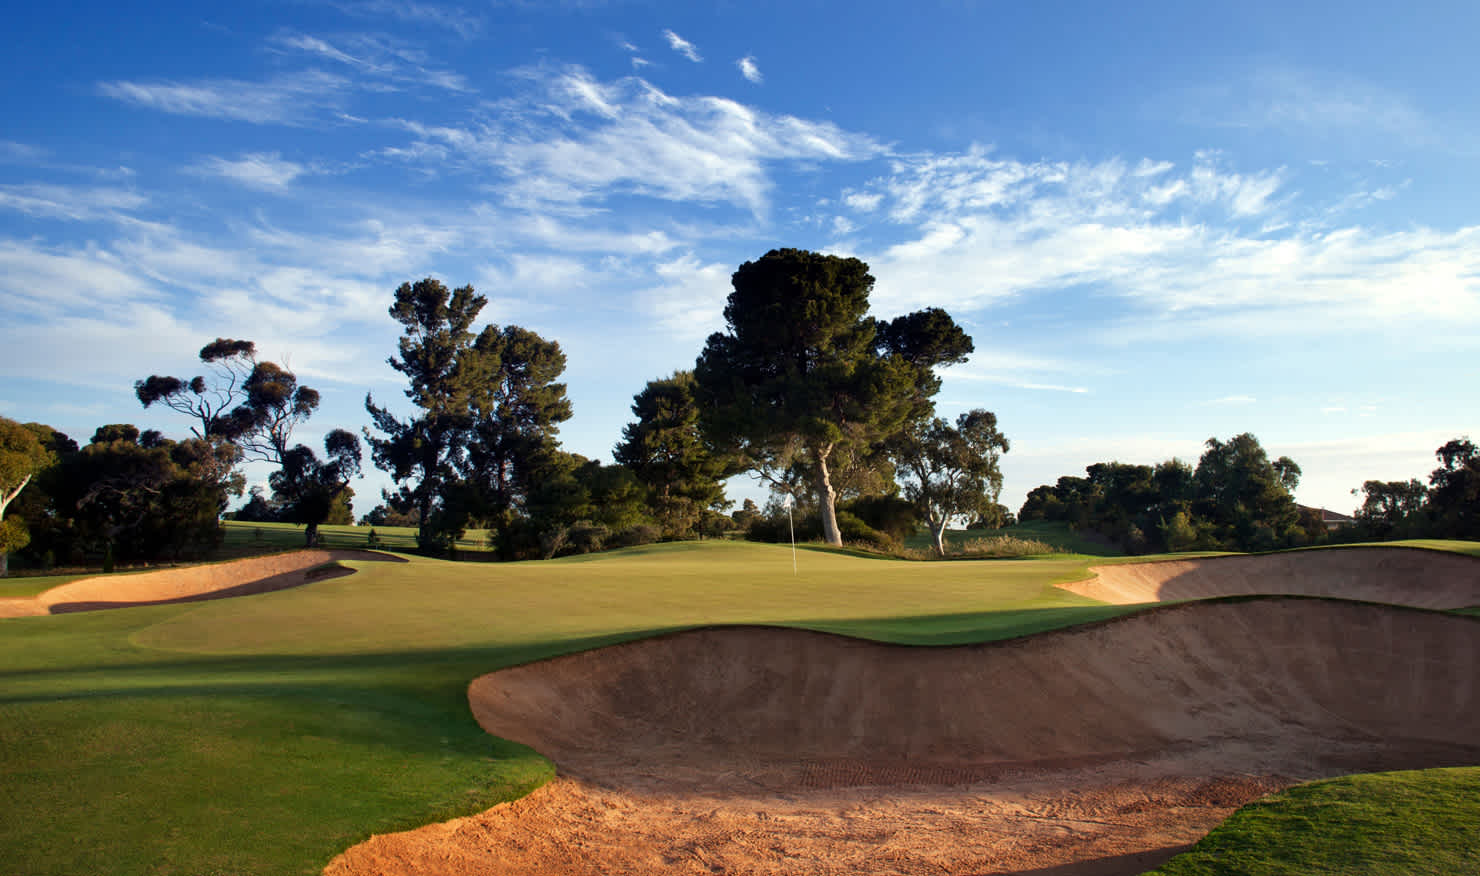 The revered Kooyonga layout has hosted several national championships.